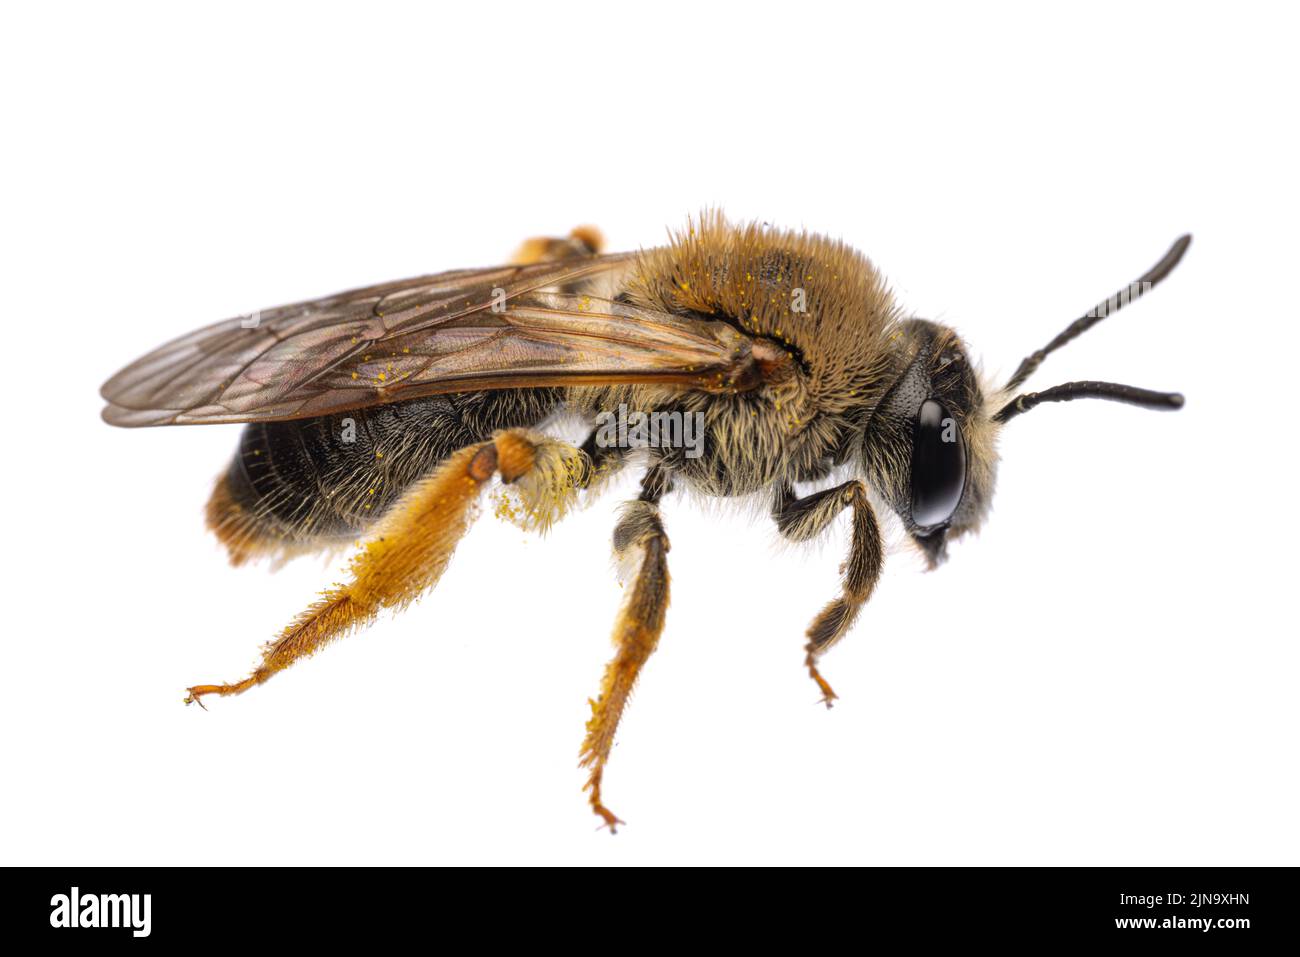 insects of europe - bees: side view with wings of female Andrena haemorrhoa (german Rotschopfige Sandbiene)  isolated on white background Stock Photo